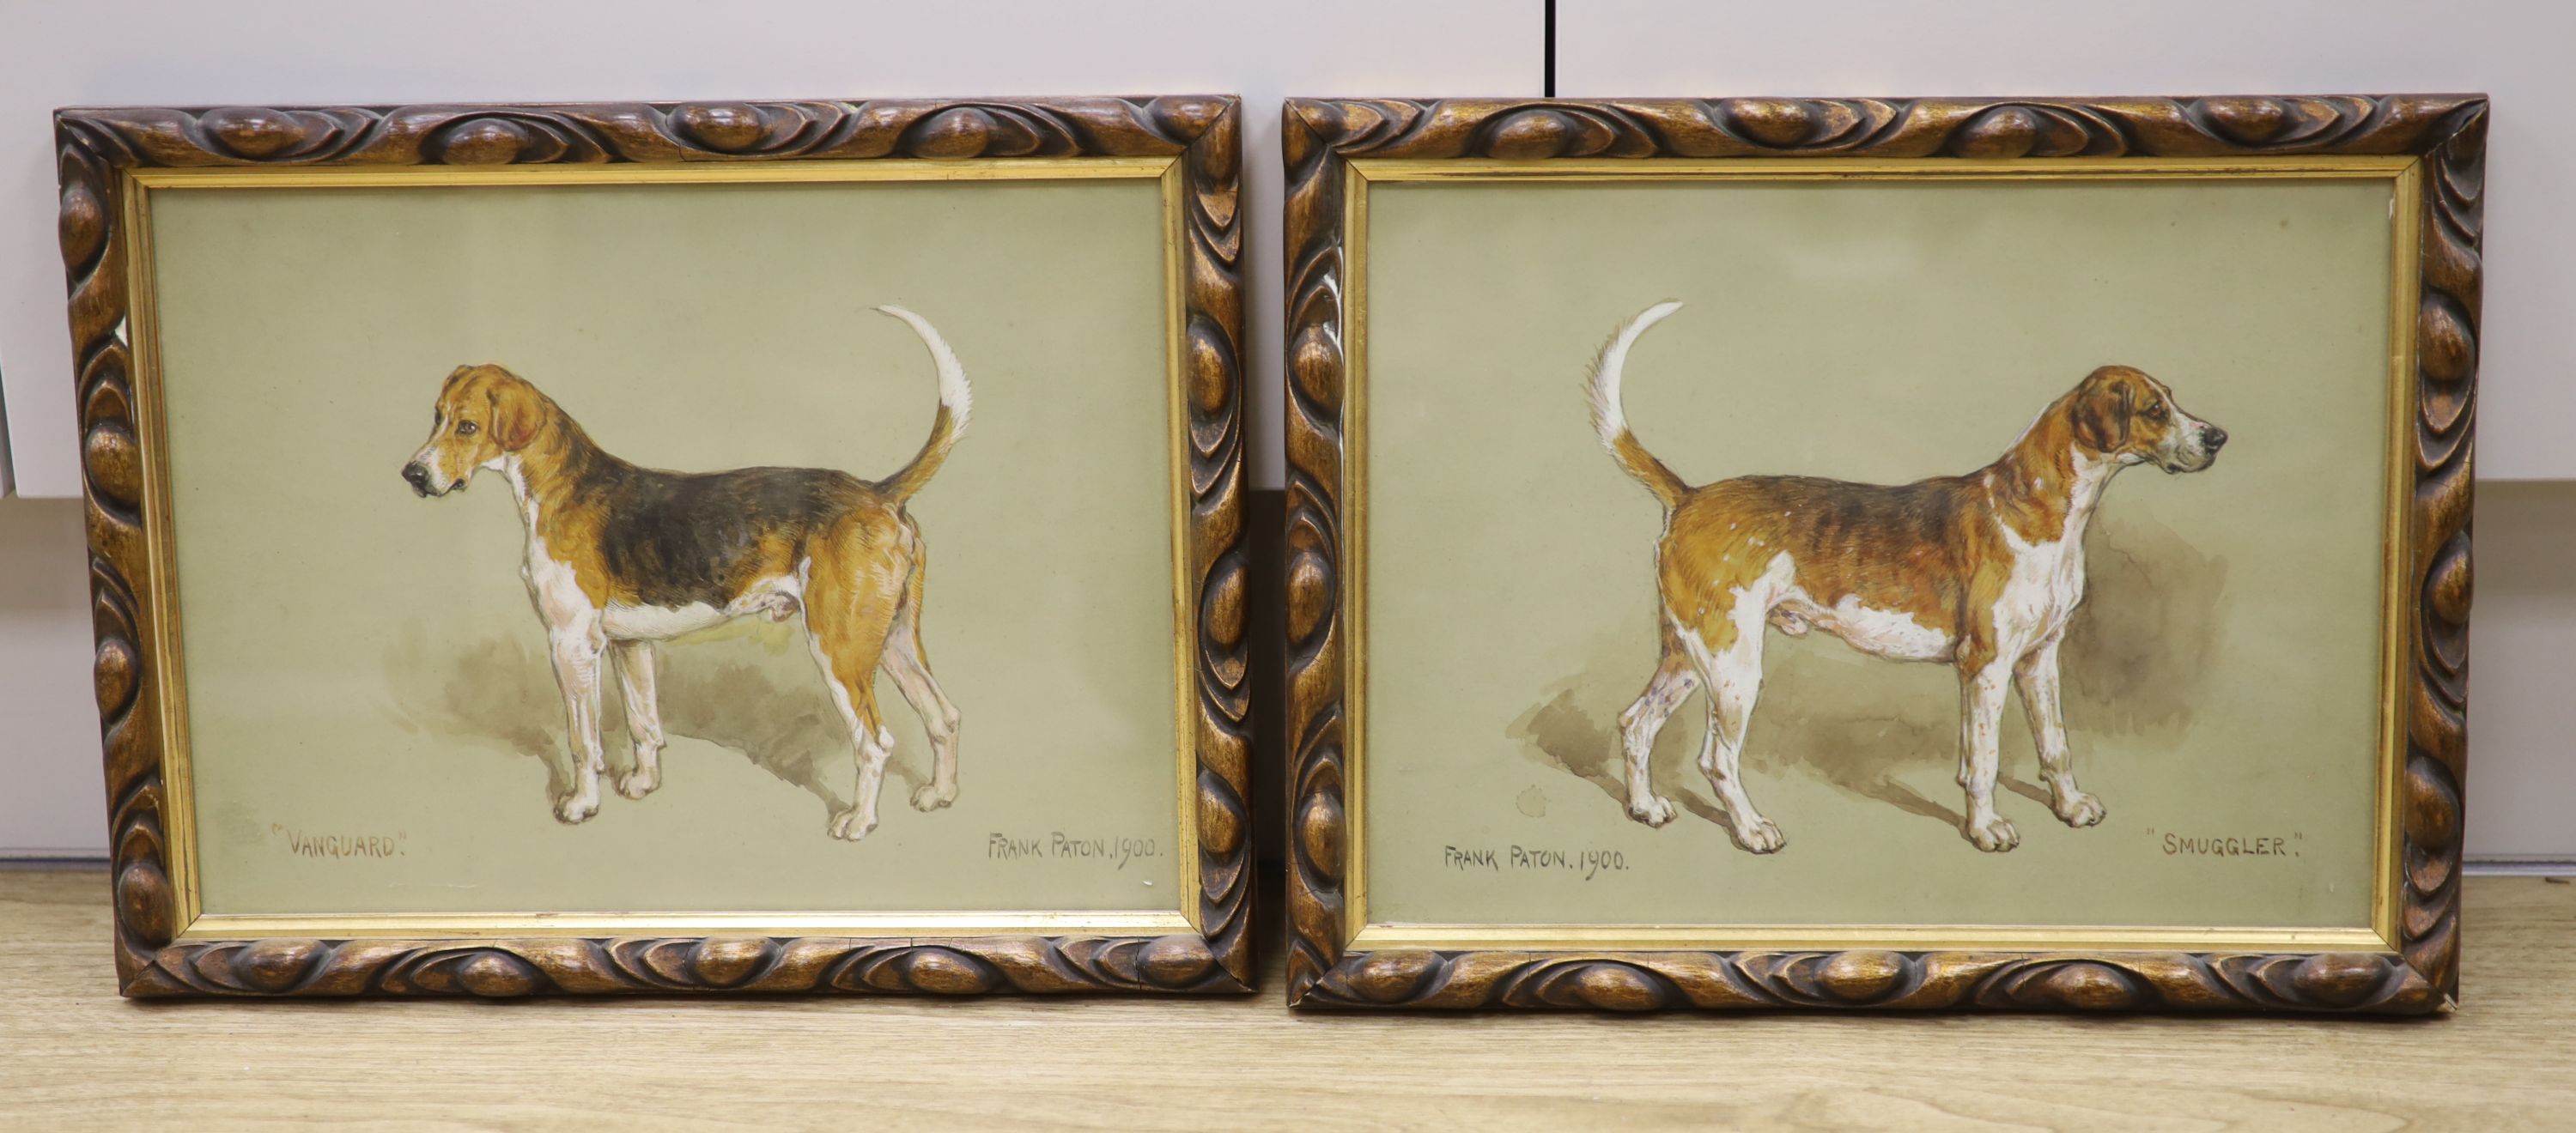 Frank Paton (1856-1909), pair of watercolours, Portraits of fox hounds; Smuggler and Vanguard, signed and dated 1900, 23 x 32cm